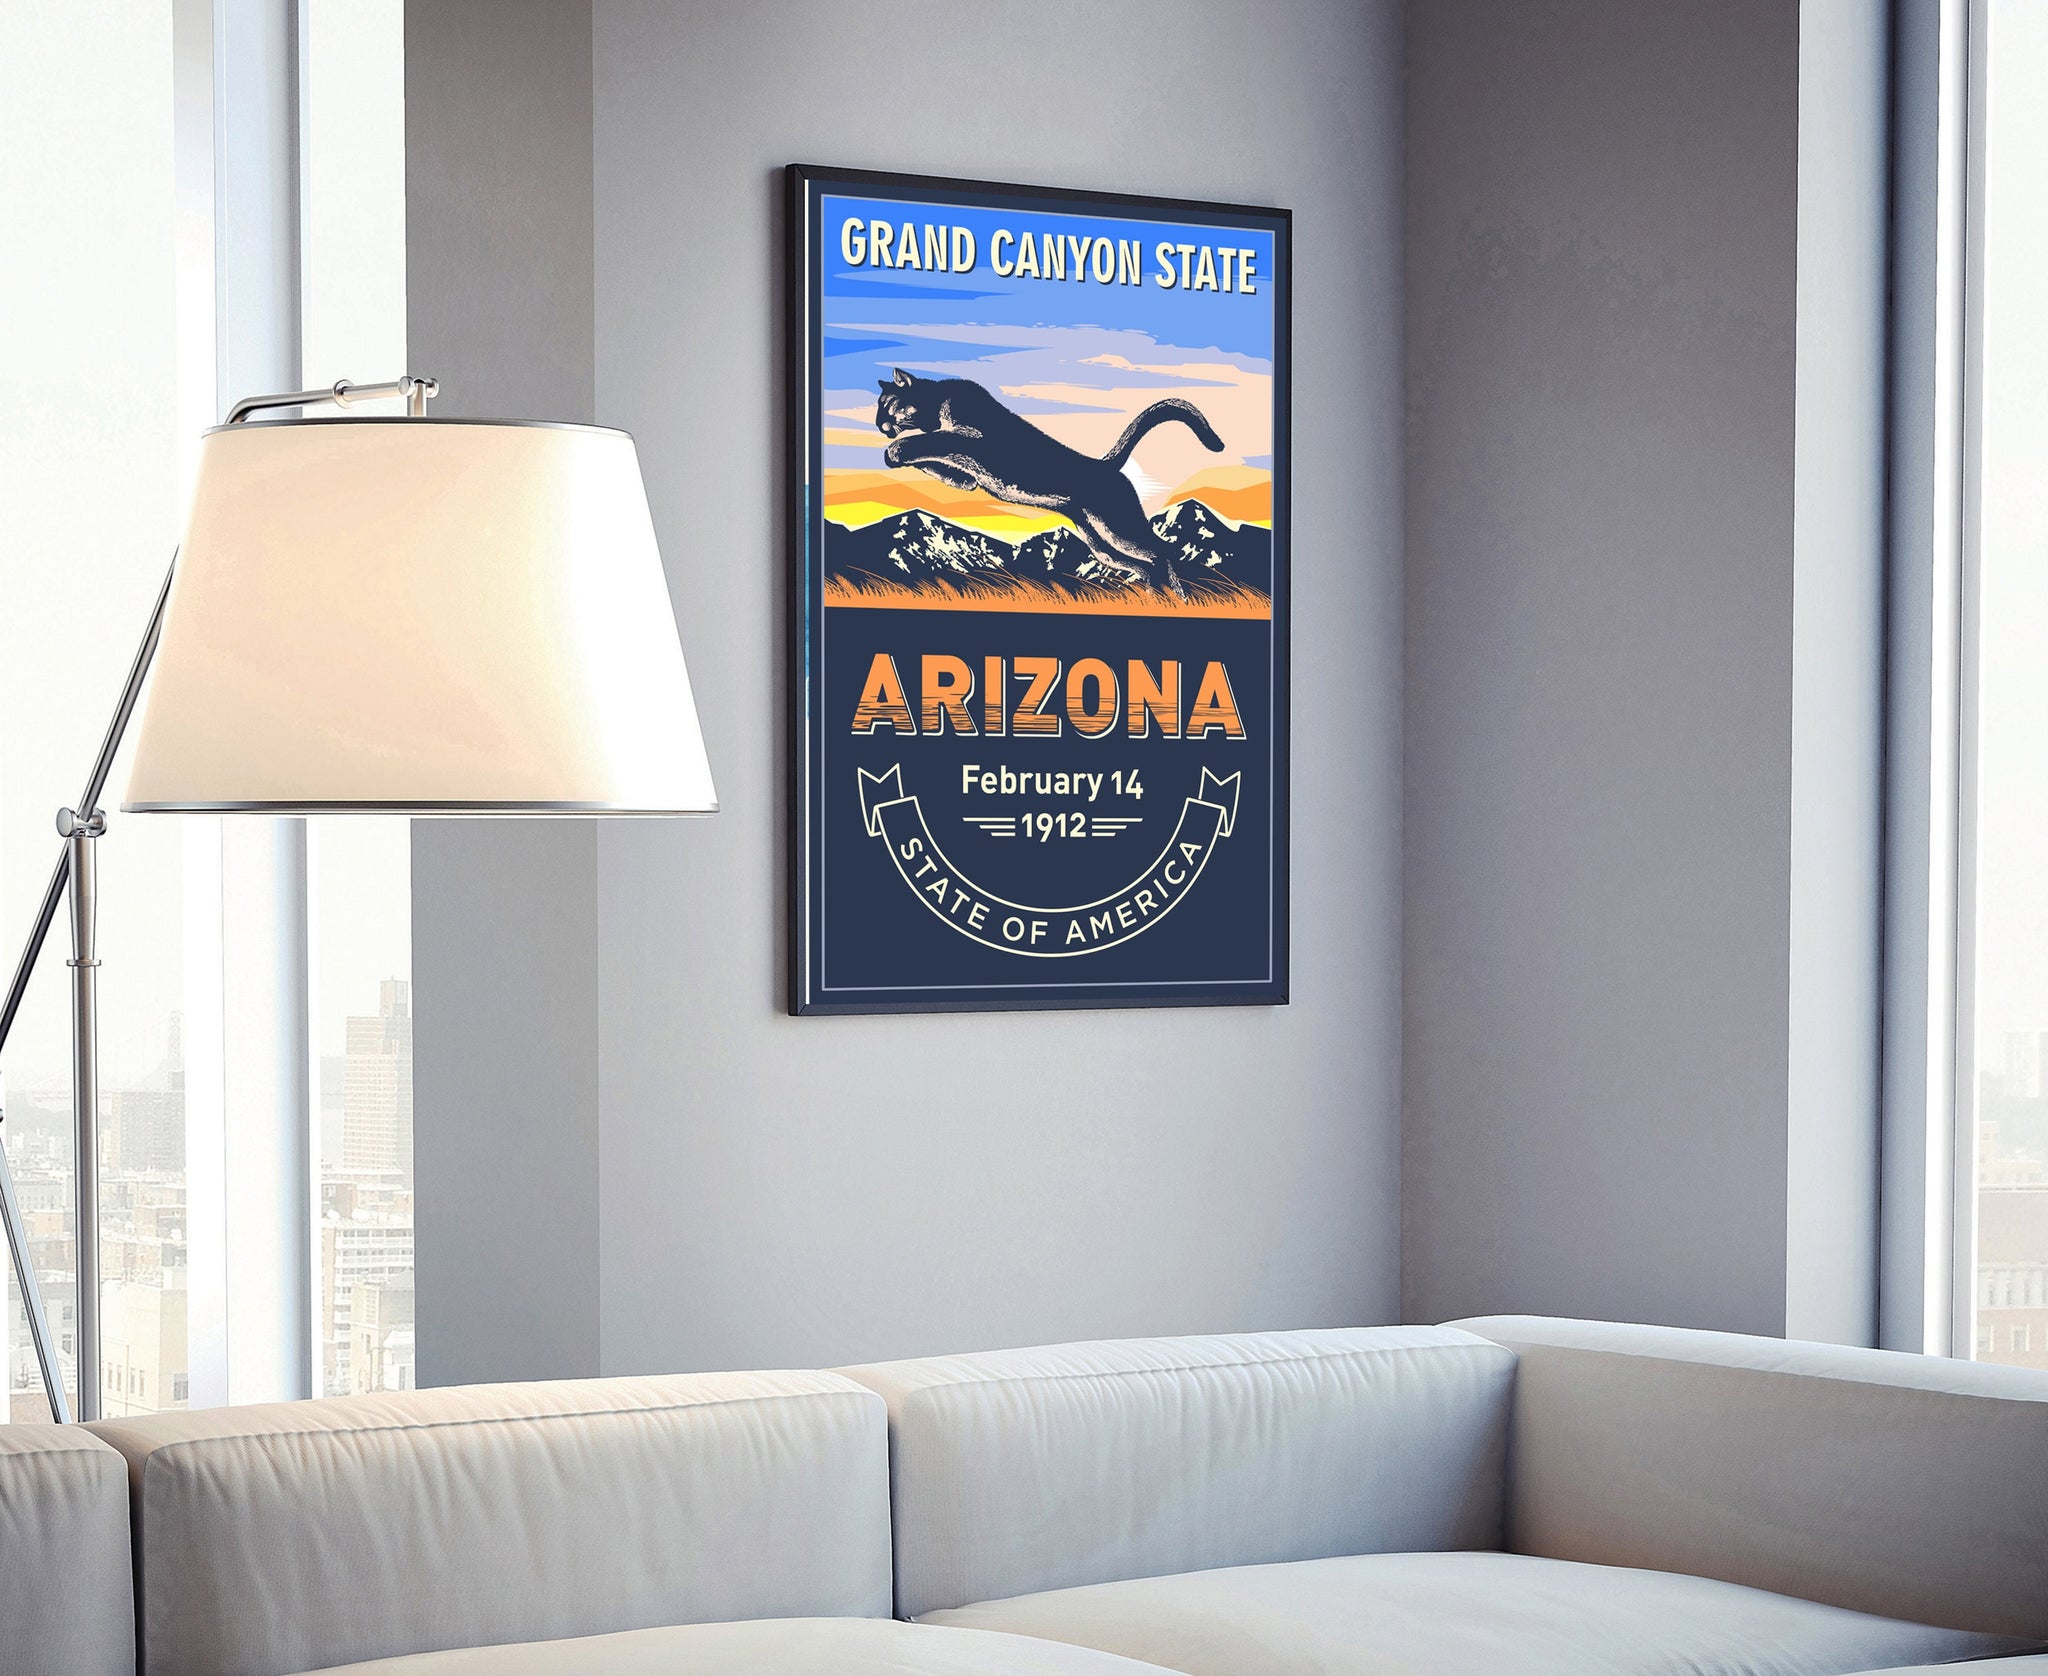 United States Arizona State Poster, Arizona Poster Print, Arizona State Emblem Poster, Retro Travel State Poster, Home and Office Wall Art